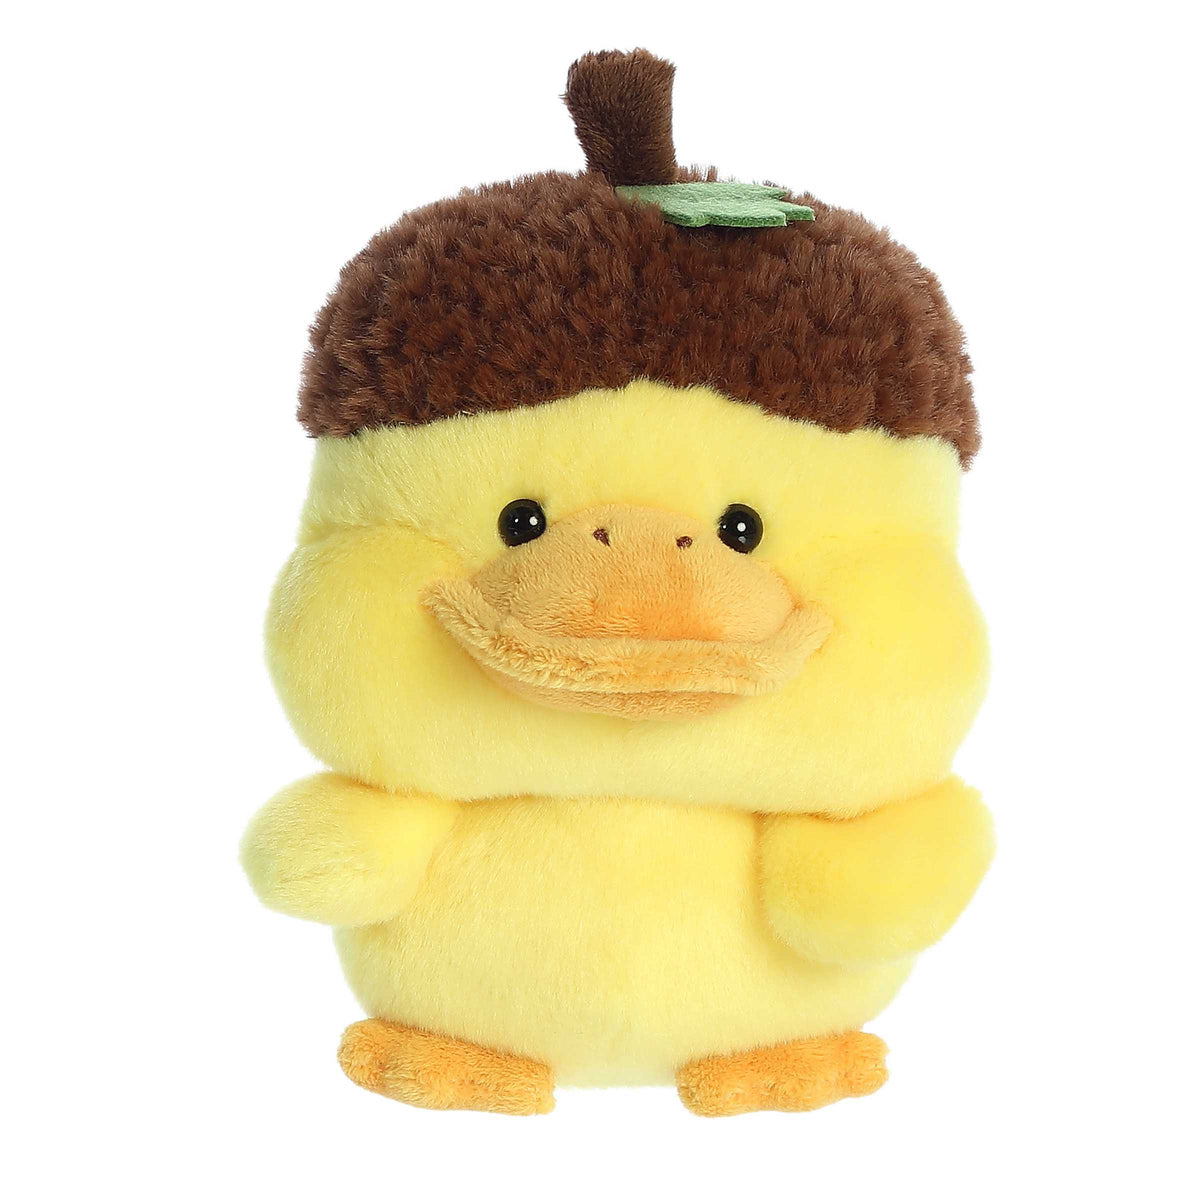 Life in a Nutshell Duckling plush from Aurora's Spring Collection, charming yellow plush with a whimsical acorn hat